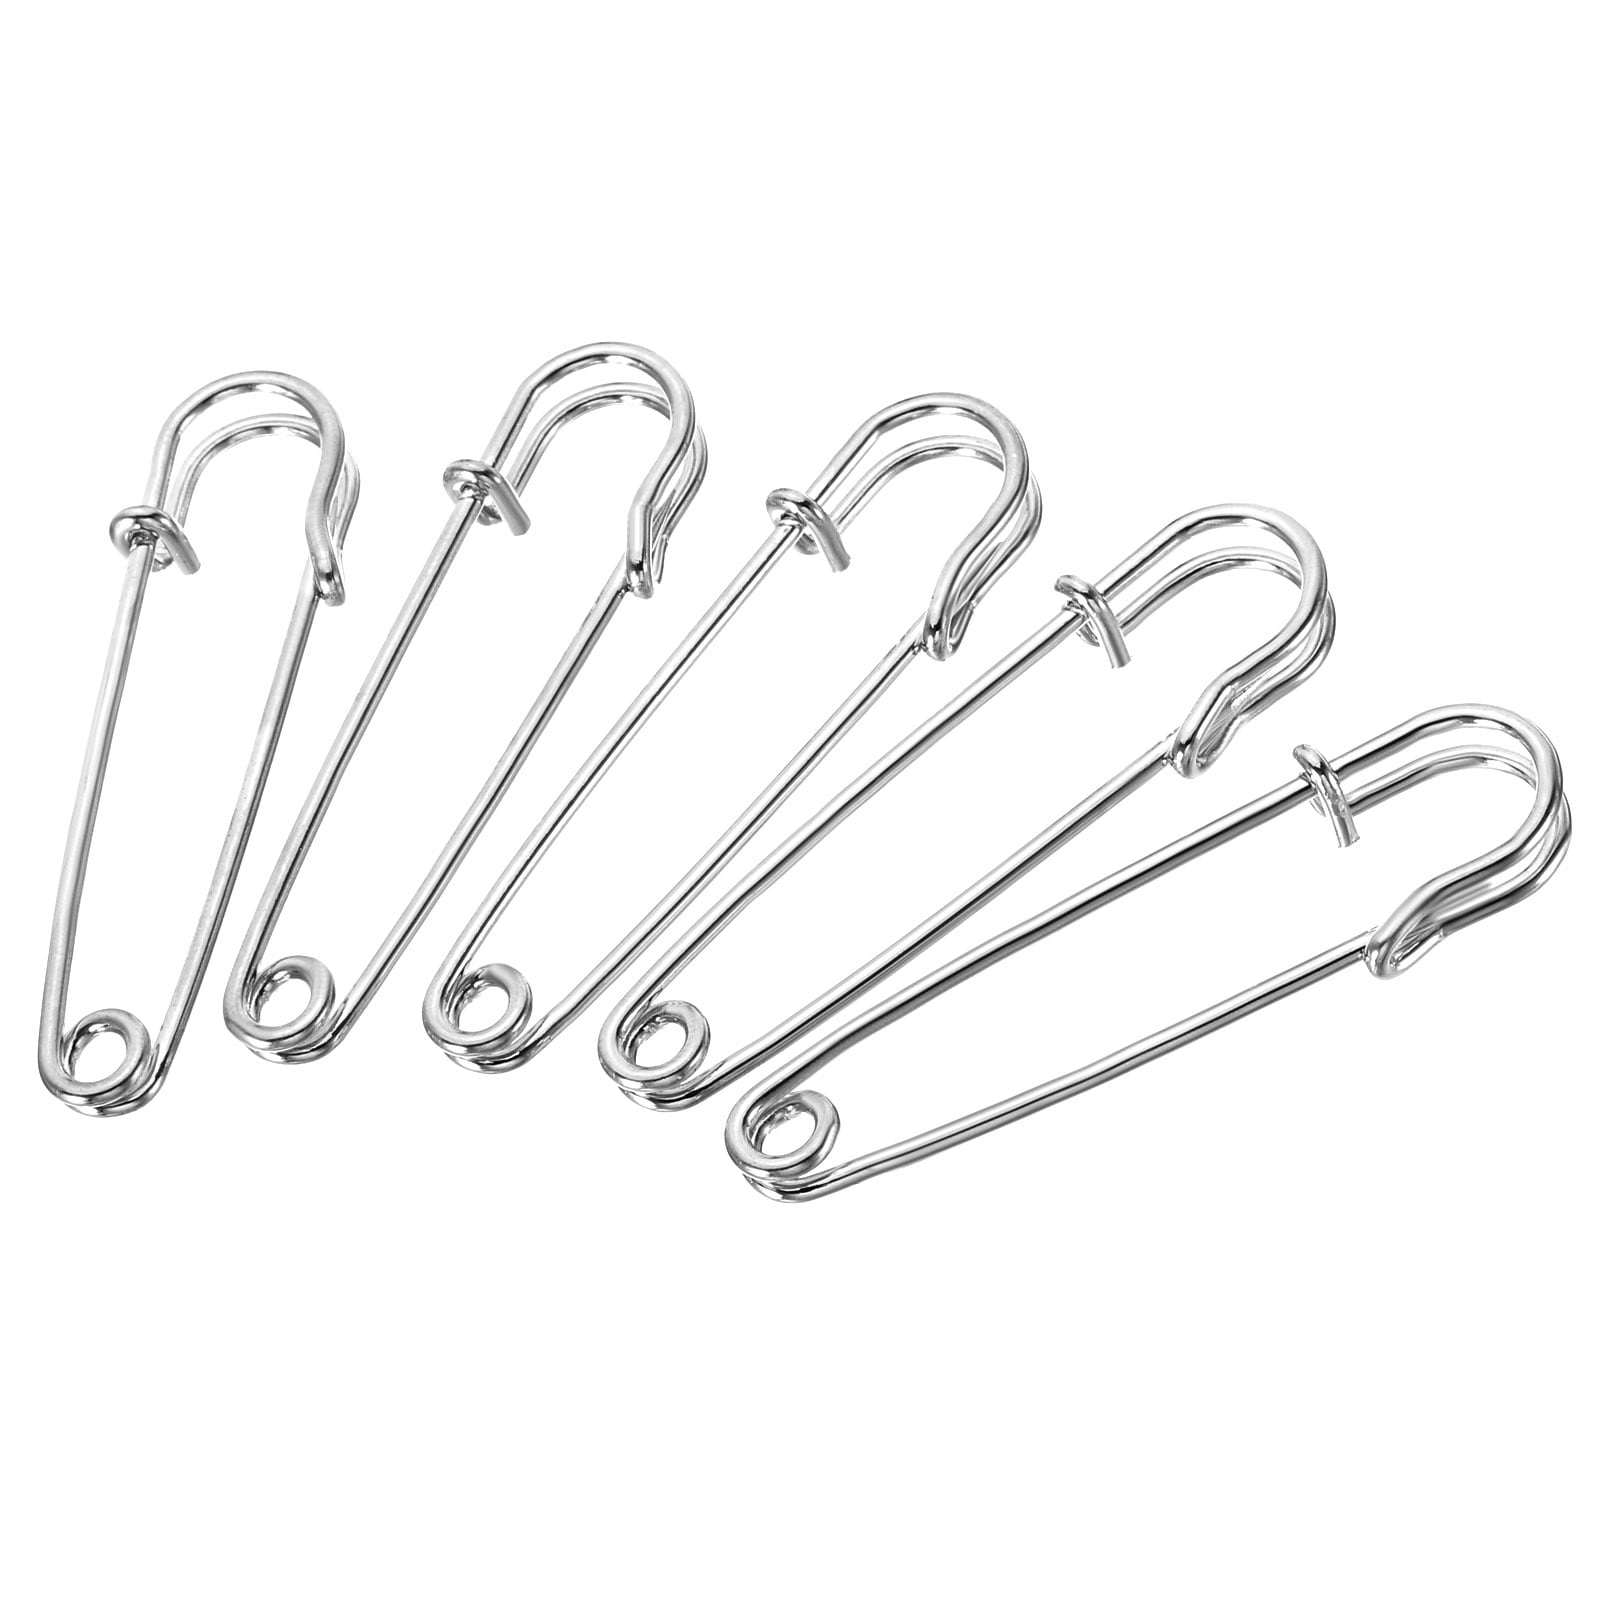 Uxcell Safety Pins 2.48 inch Large Metal Sewing Pins Purple 50pcs